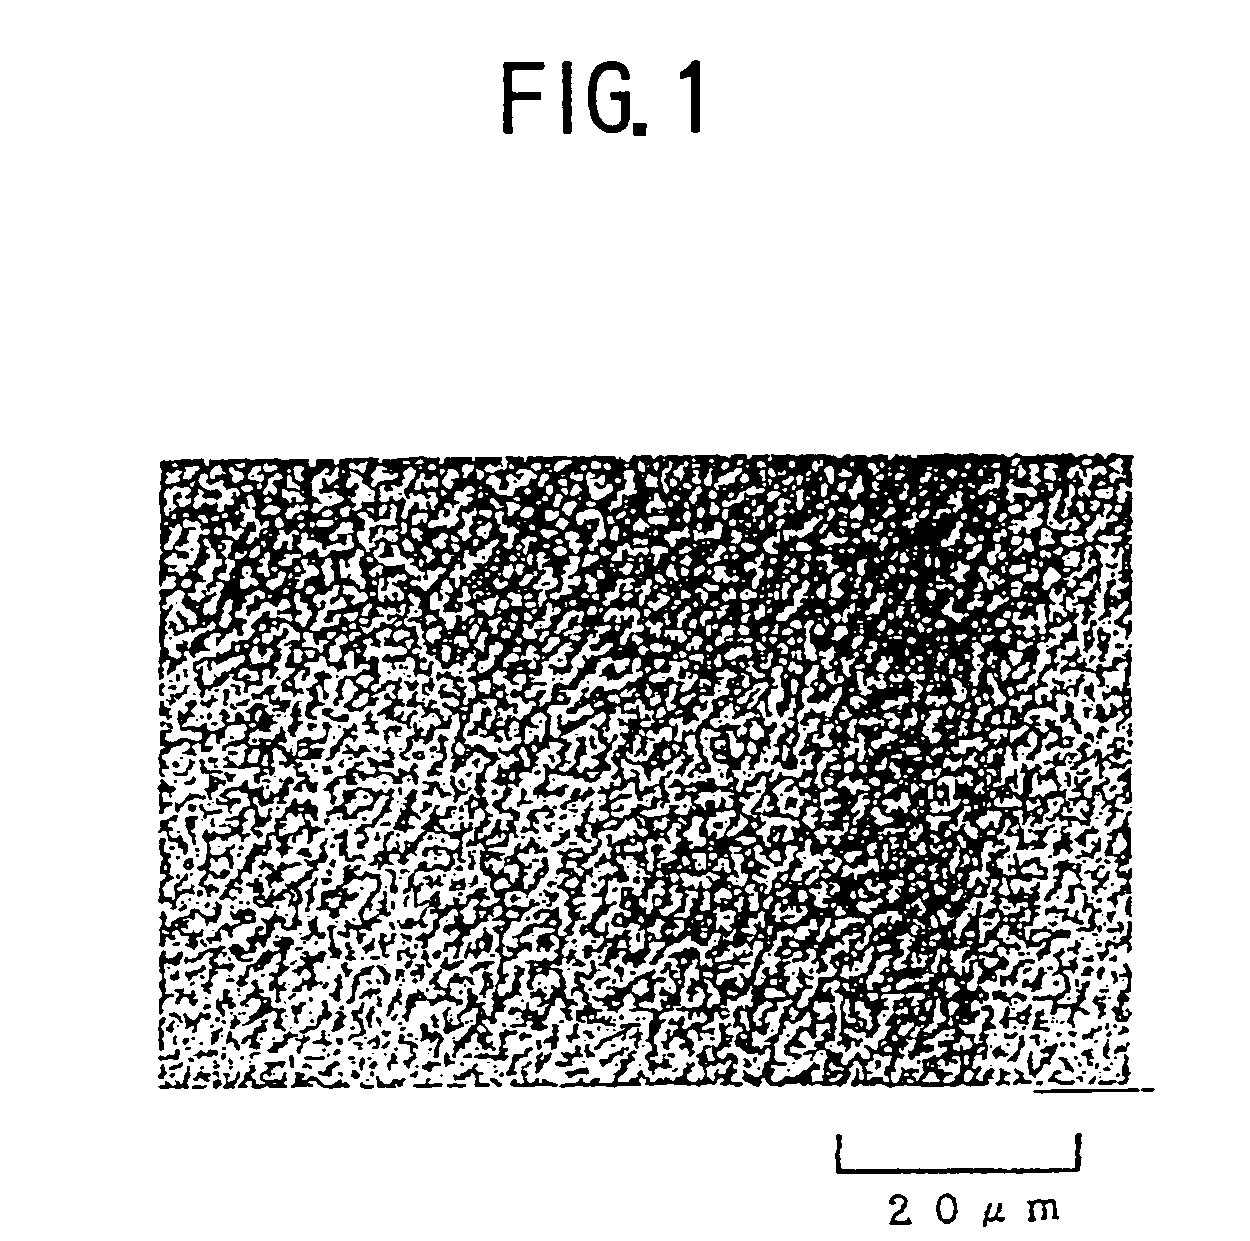 Laser diode having an active layer containing N and operable in a 0.6 μm wavelength band